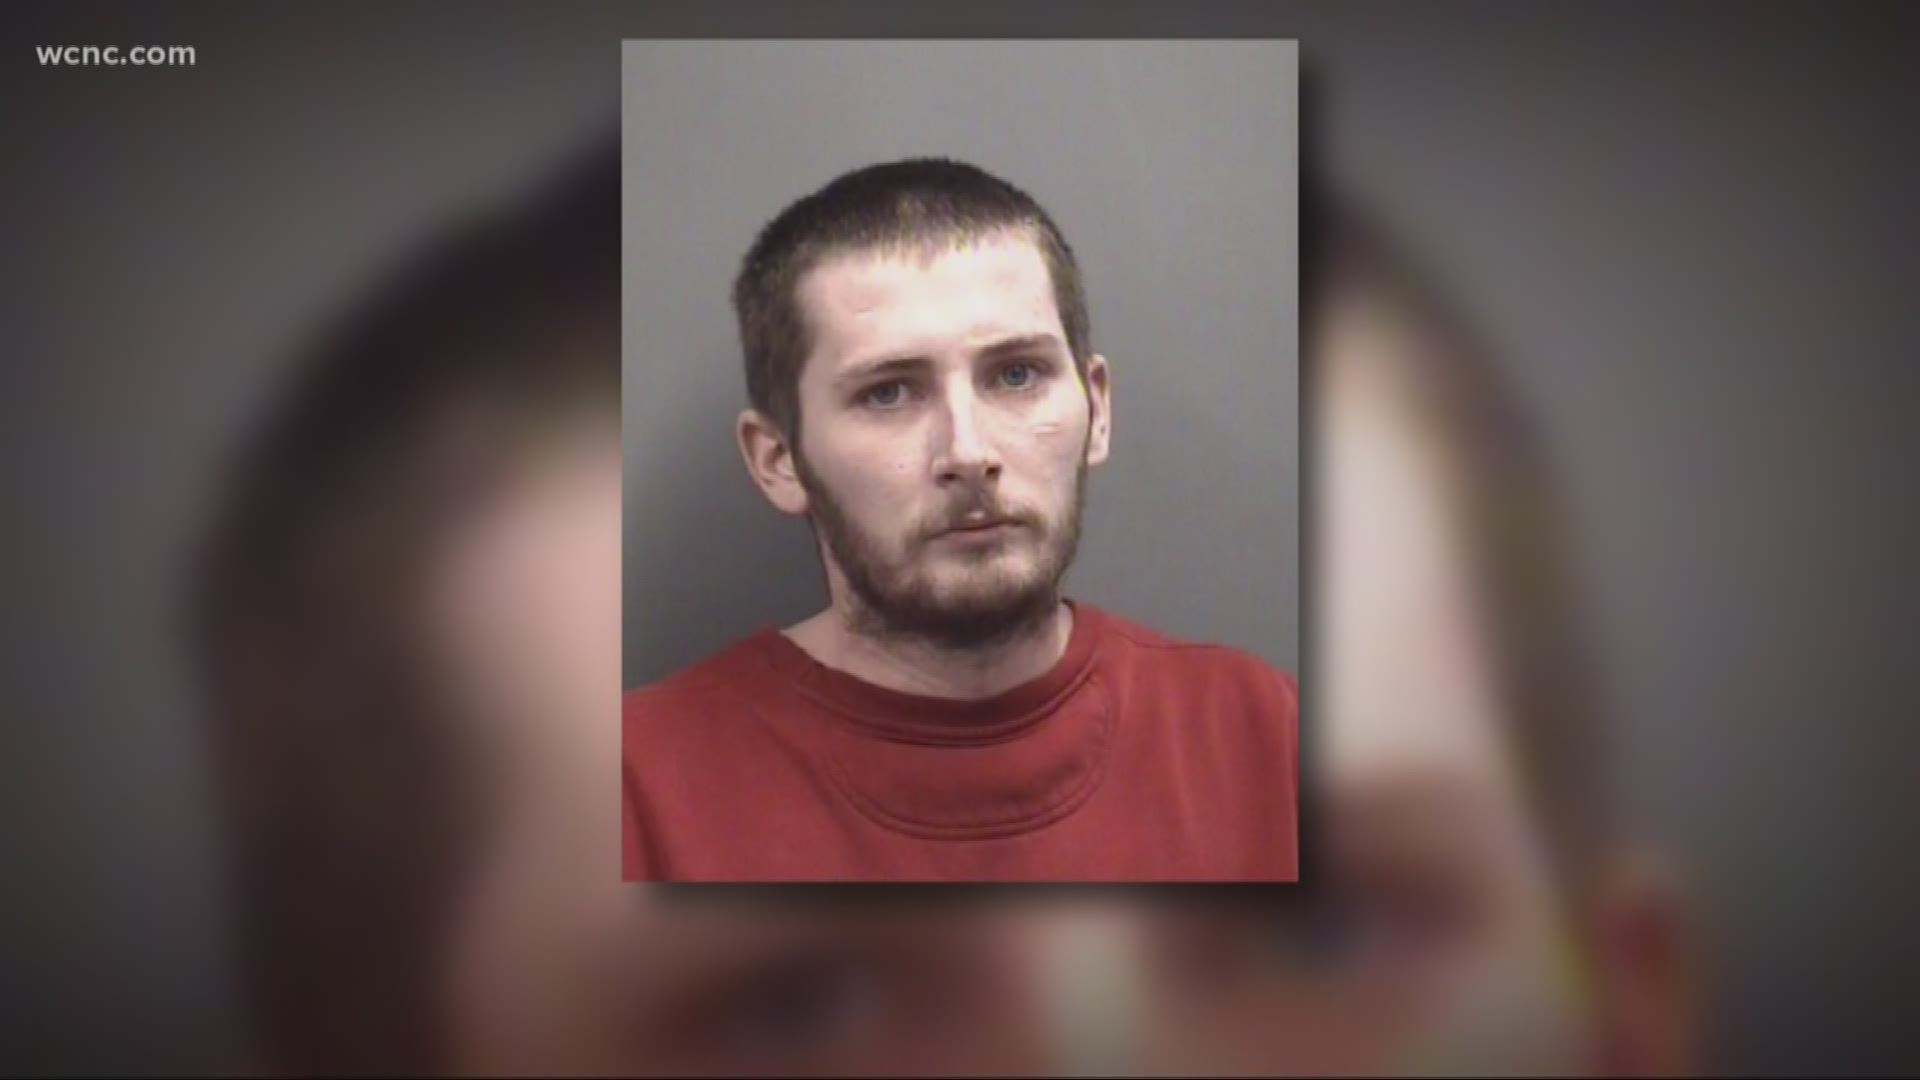 According to the Rowan County Sheriff's Office, Jake Kelly faces new charges related to the disappearance of 14-year-old Lauren Haynes.